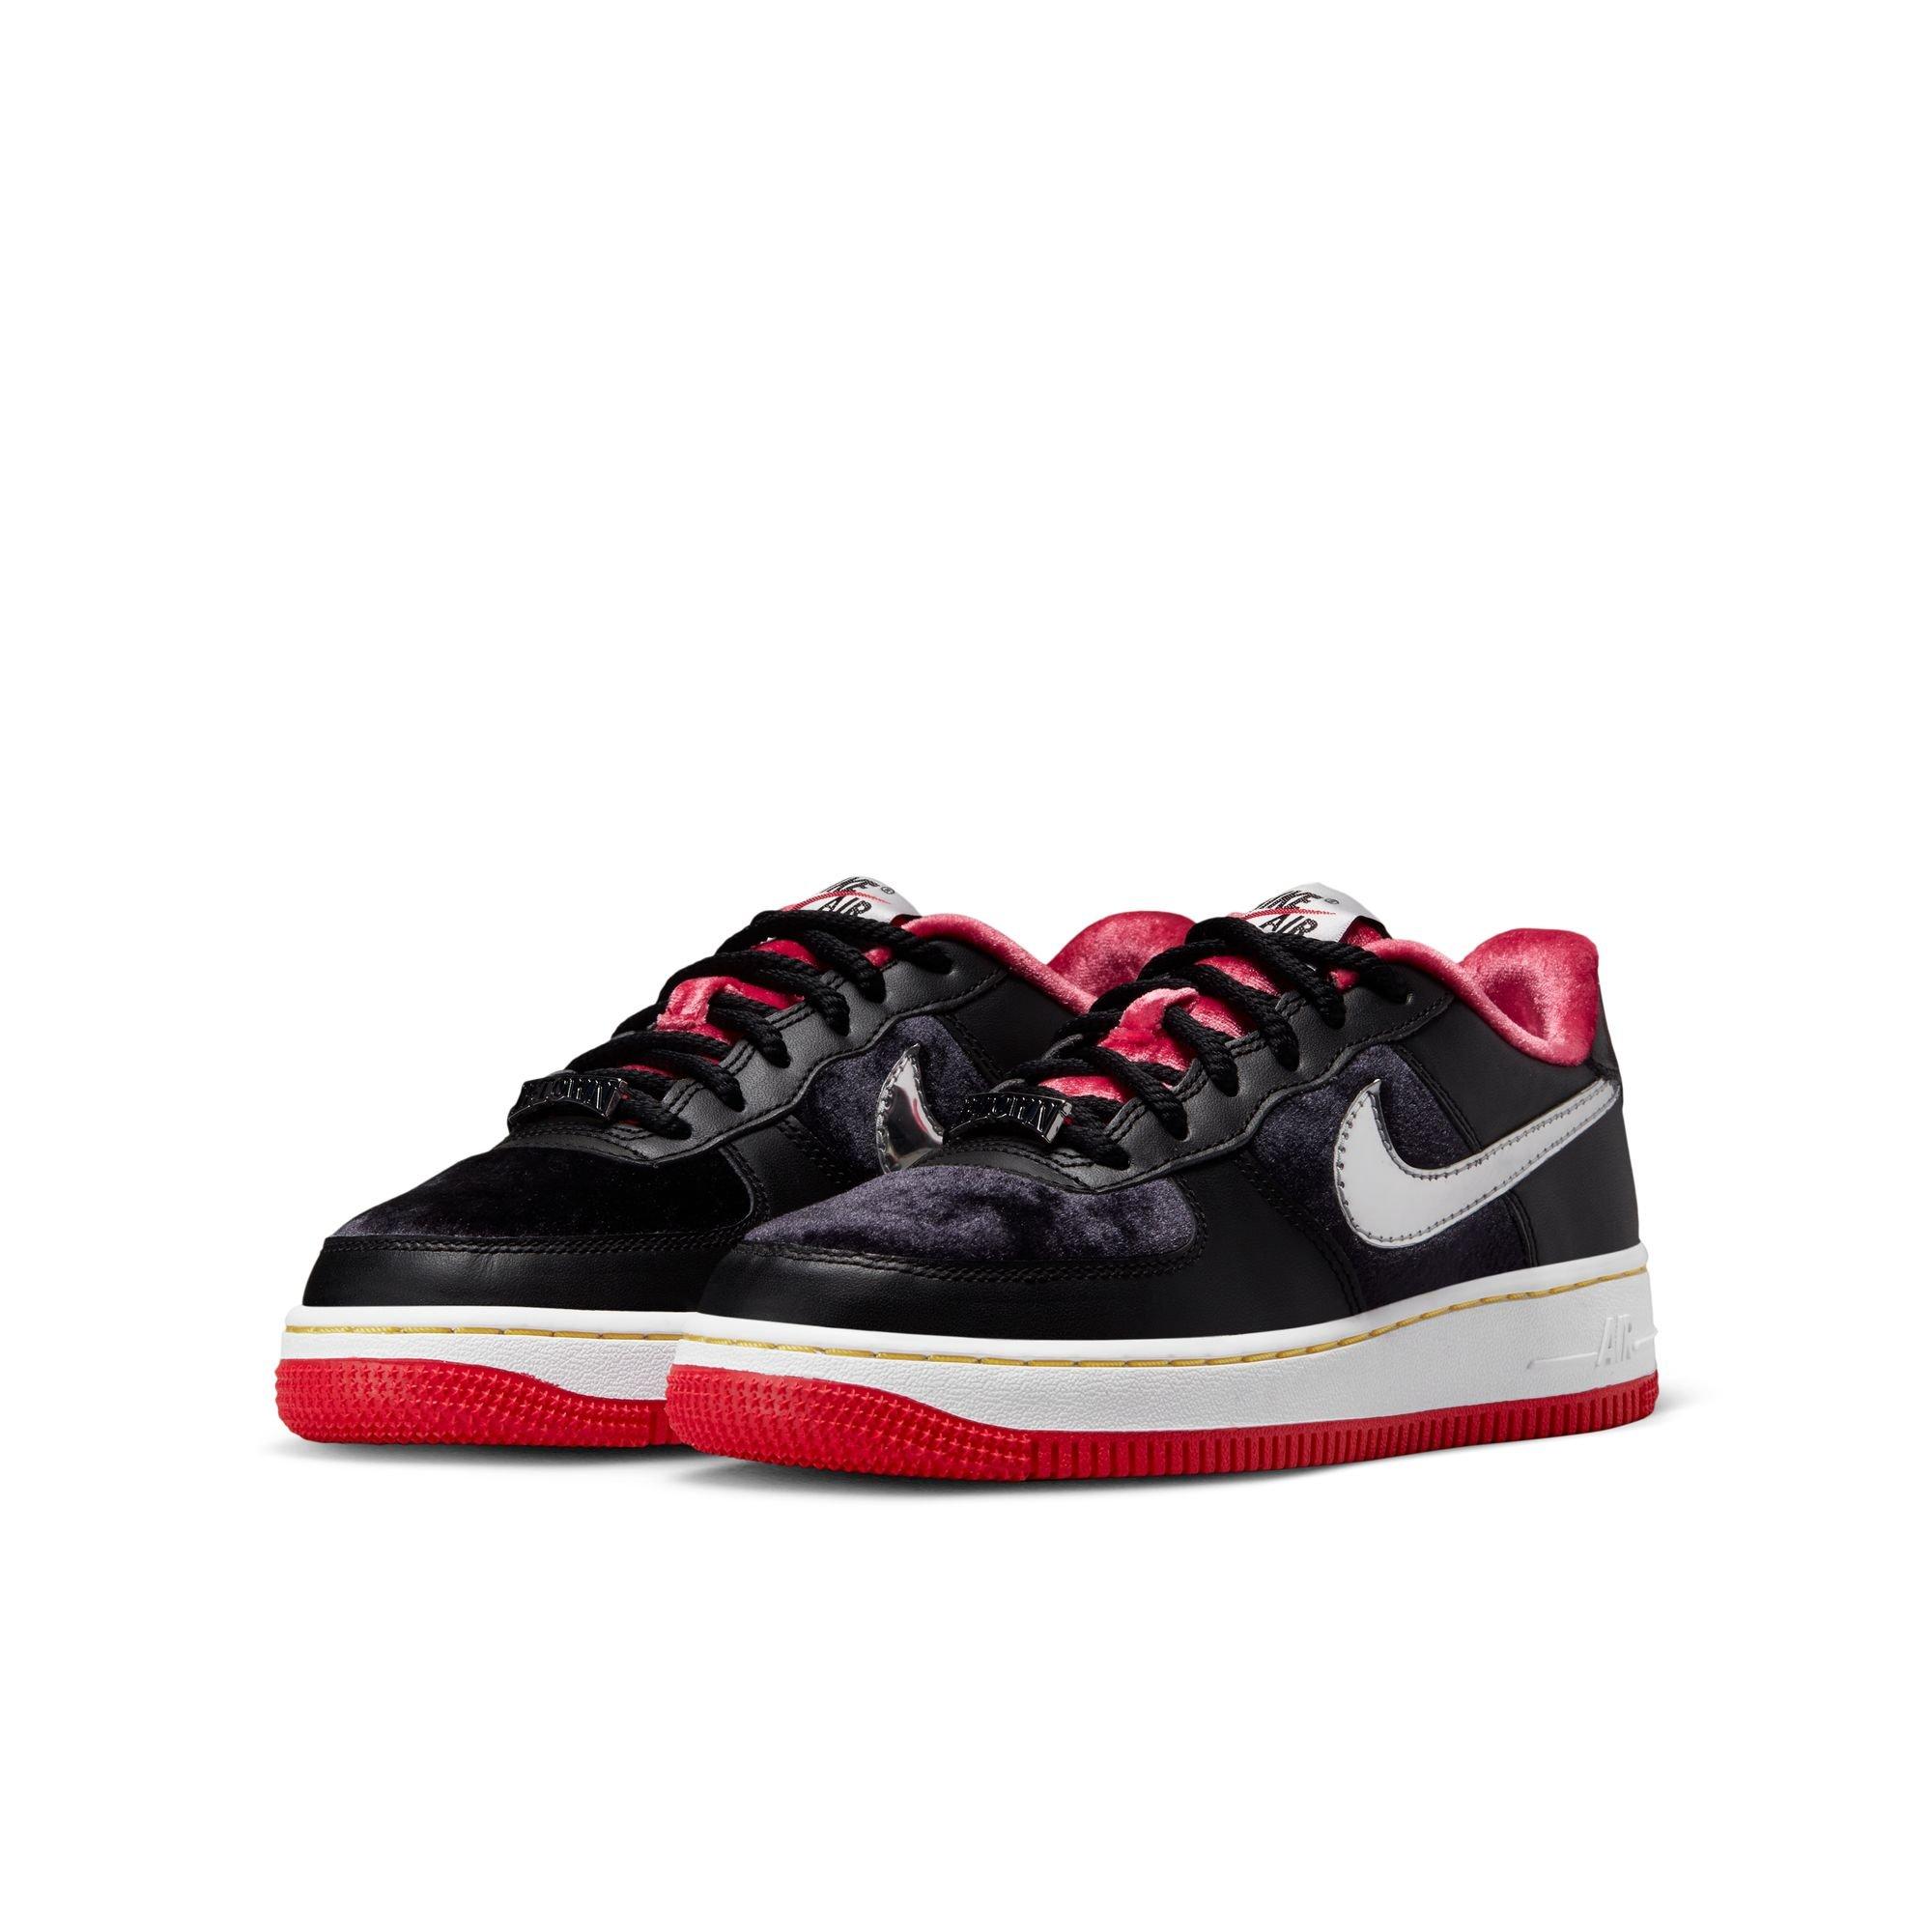 Nike Air Force 1 Low Black/White/Red/Gum